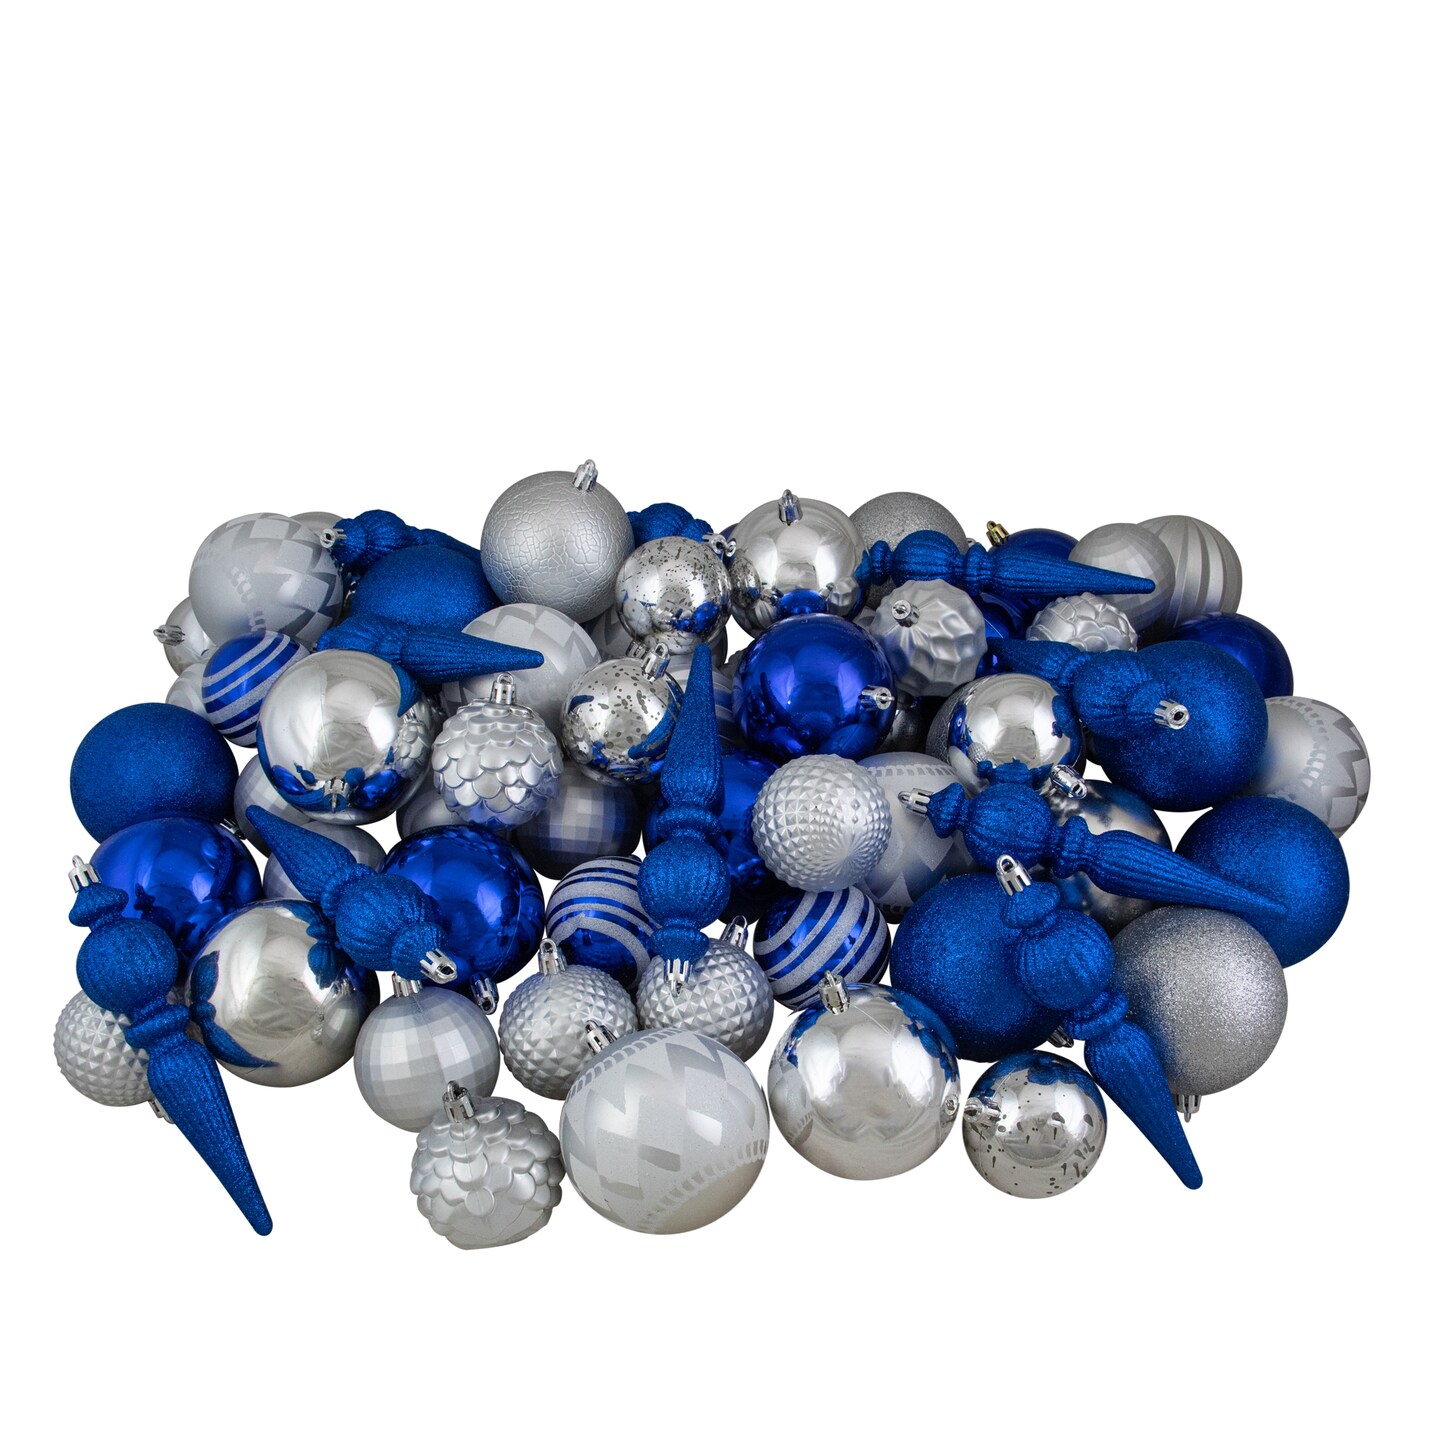 Northlight 75ct Blue and Silver Shatterproof 3-Finish Christmas Ball Ornaments